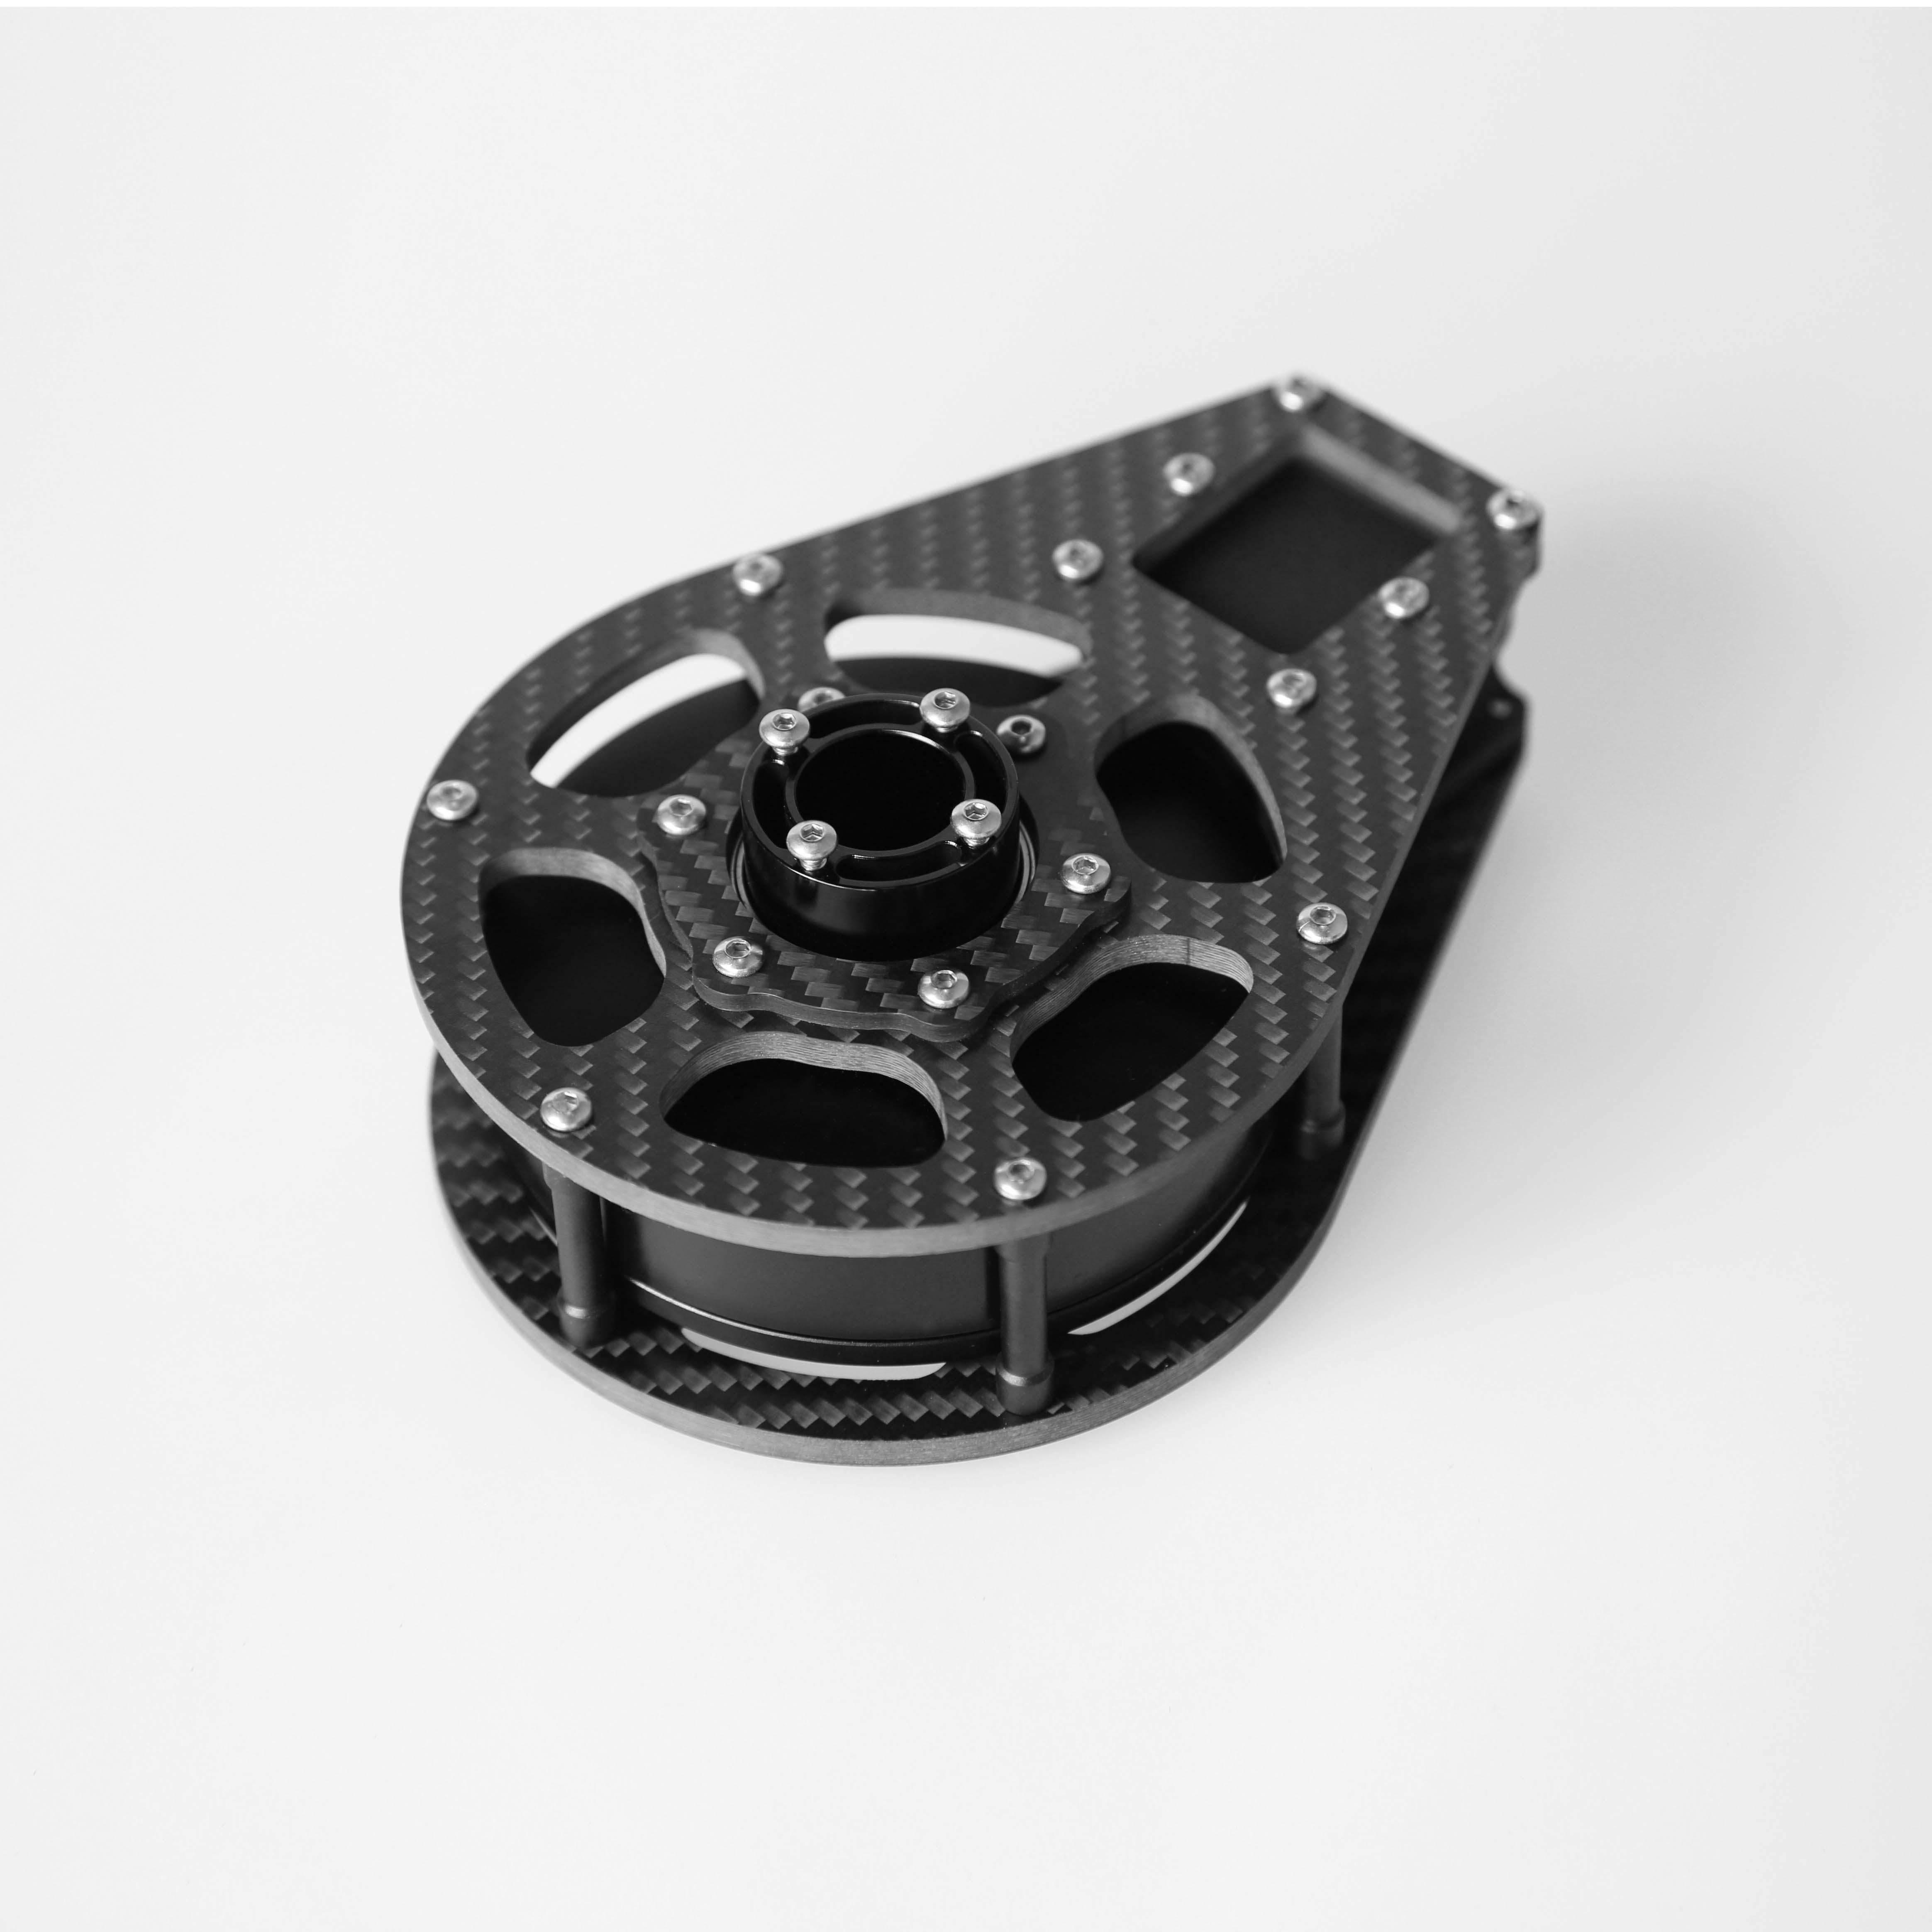 Carbon fiber motor cage 3 Axis Tilt X Axis with 6208 motor - Click Image to Close